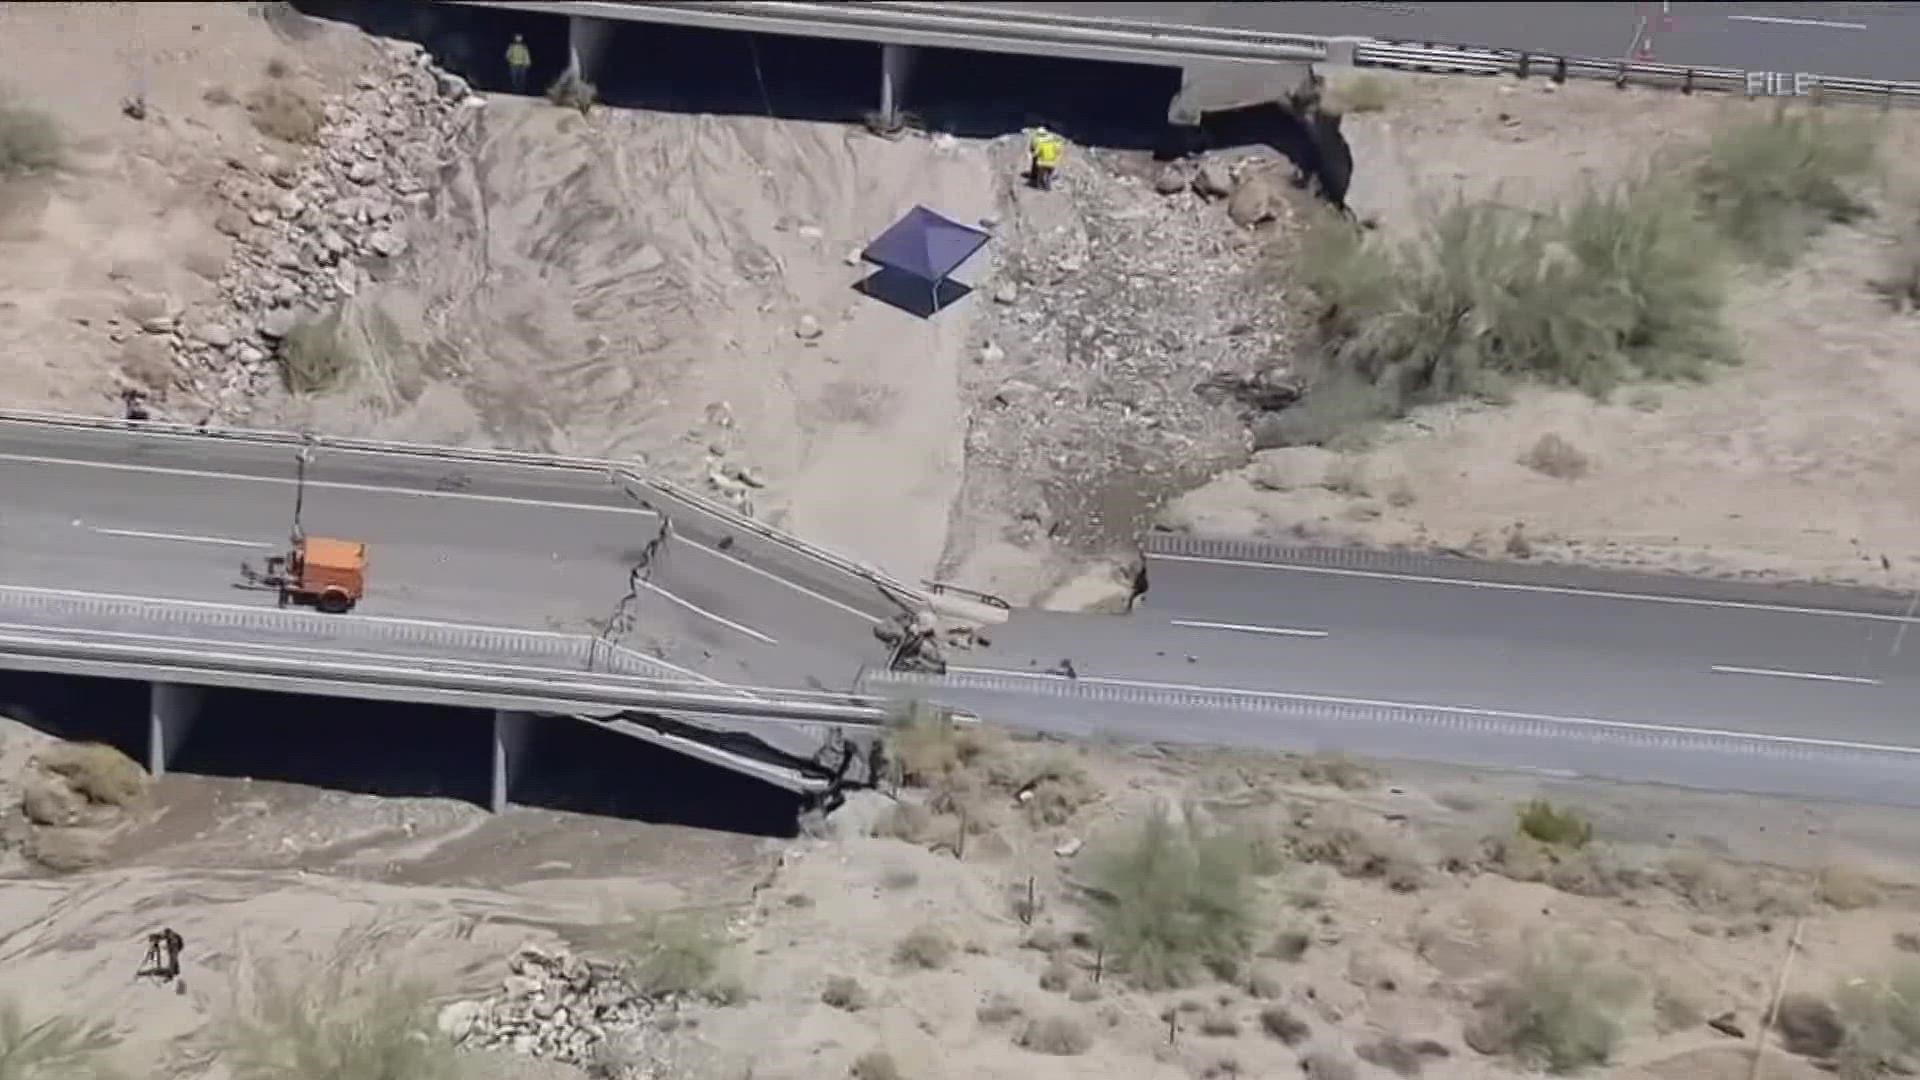 Officials say the main highway from Los Angeles to Phoenix has been damaged by a flash flood that washed out lanes on the eastbound side of Interstate 10.